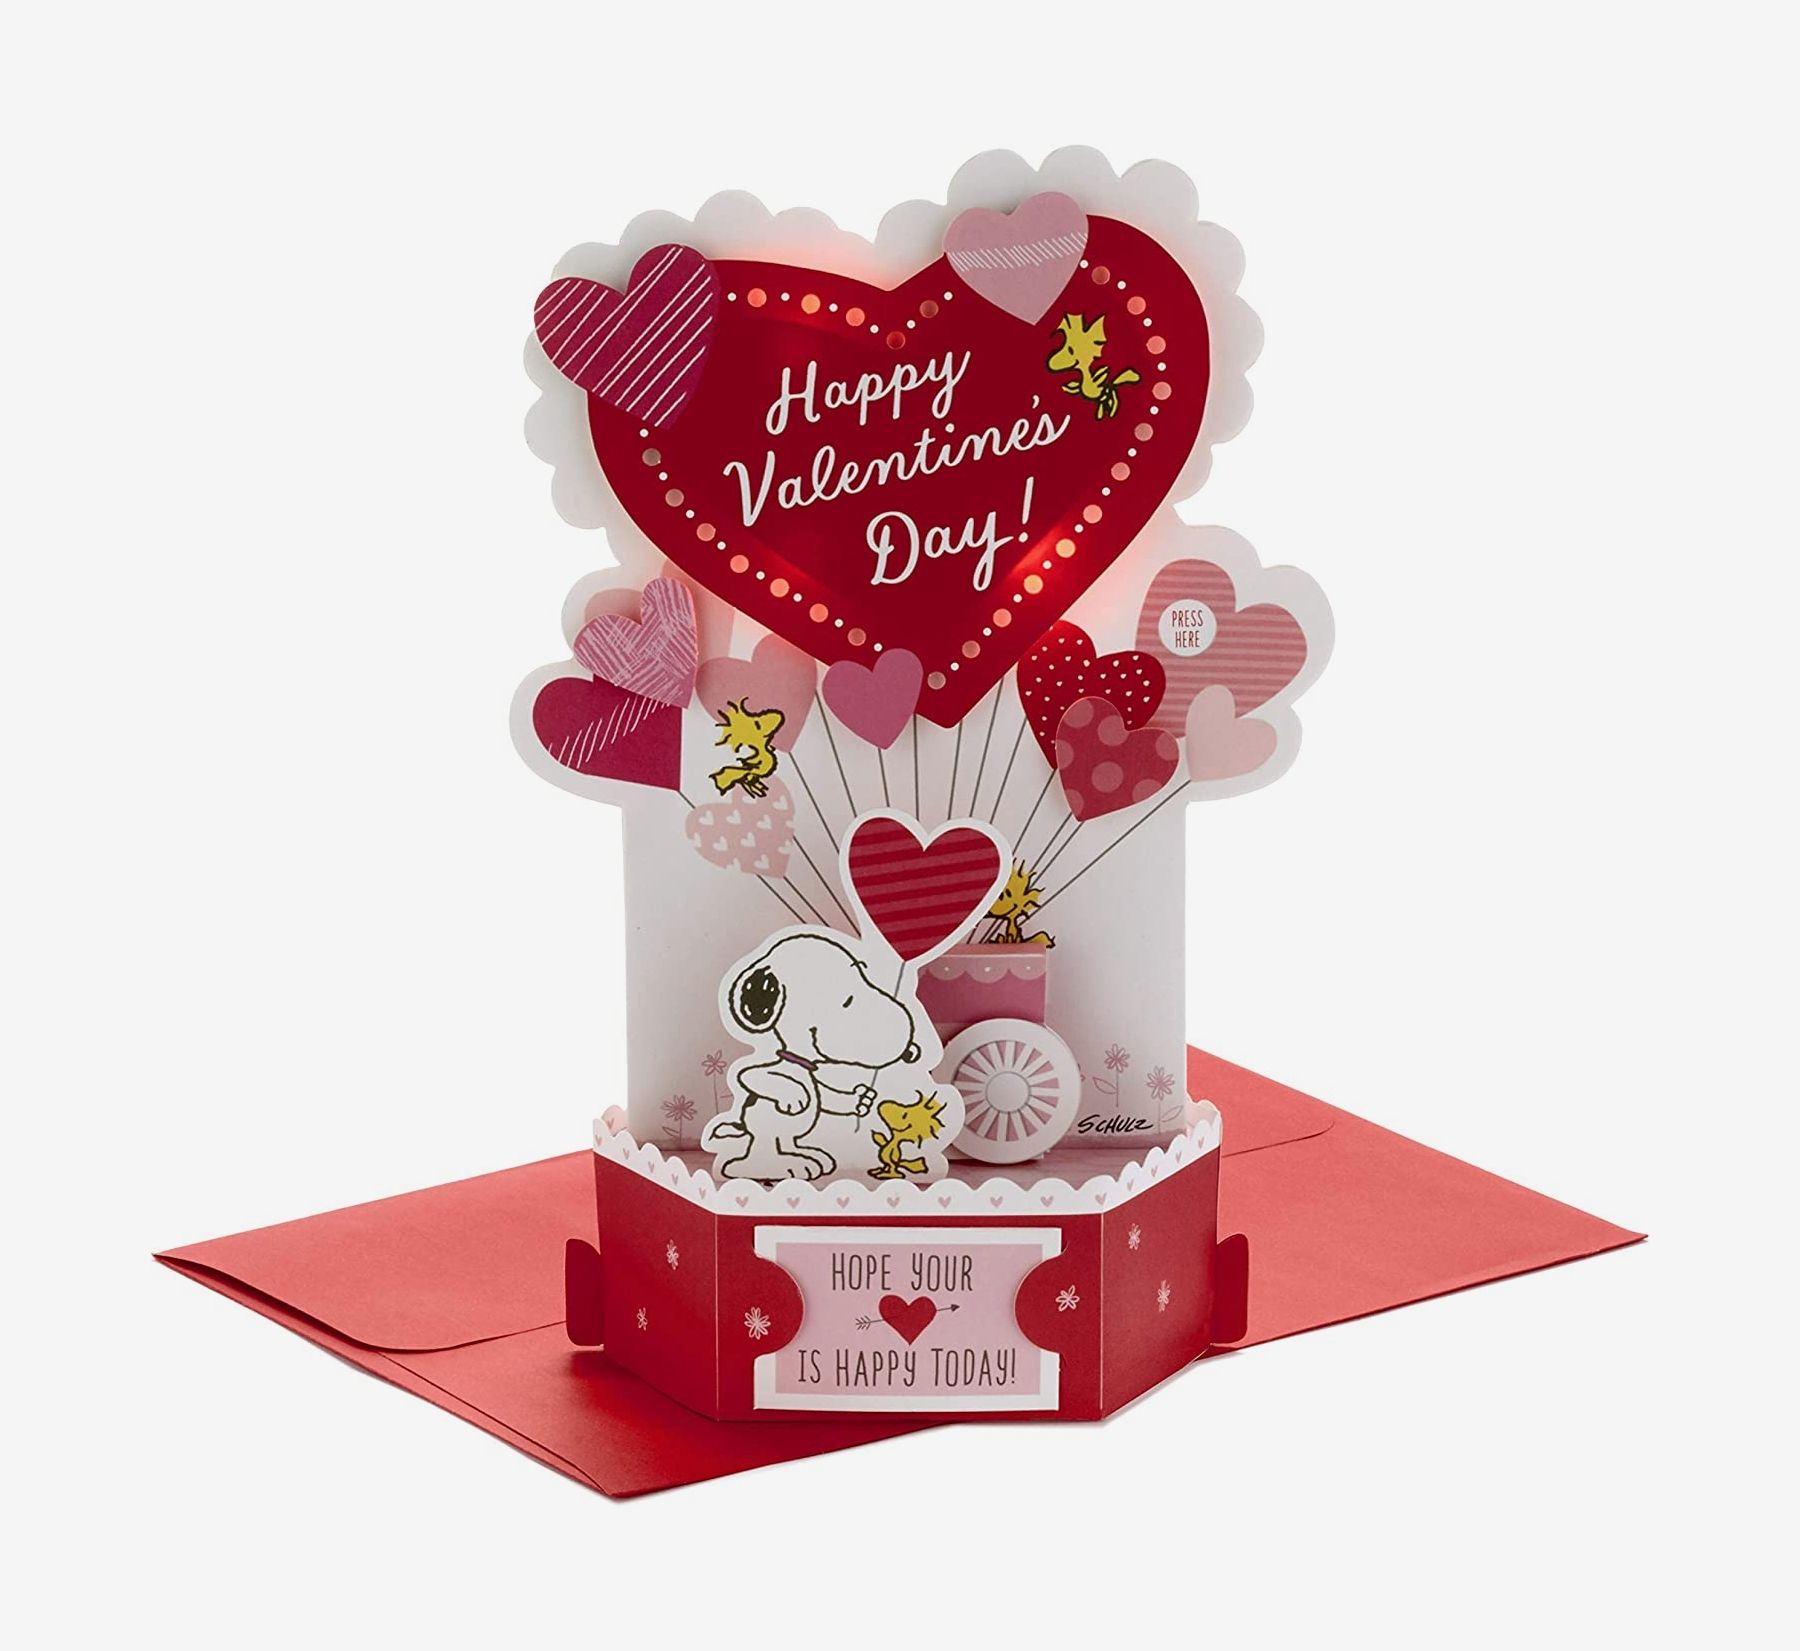 100 Grand Heart Box, Great Valentine's Day Gift, Individually